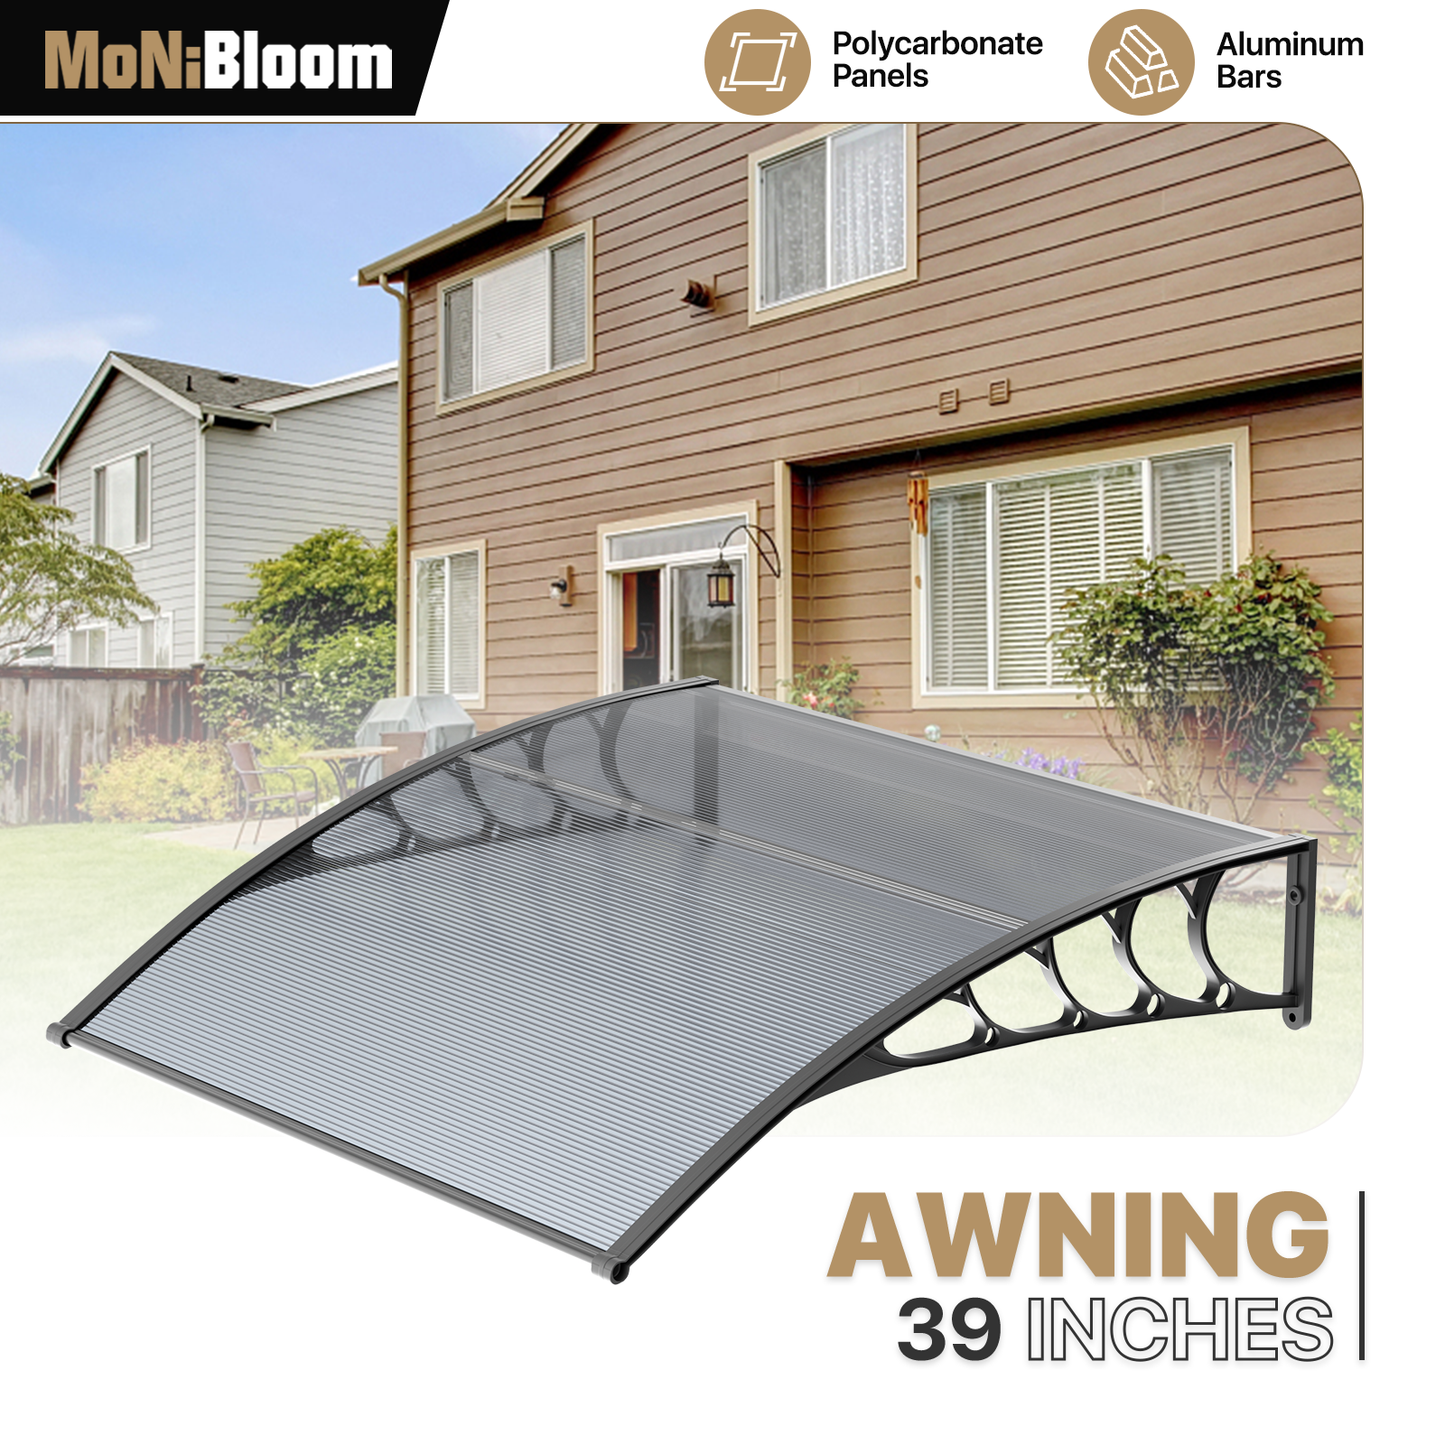 39"x35" Window Awning UV Protect Cover Outdoor Front Door Canopy Patio SunShade